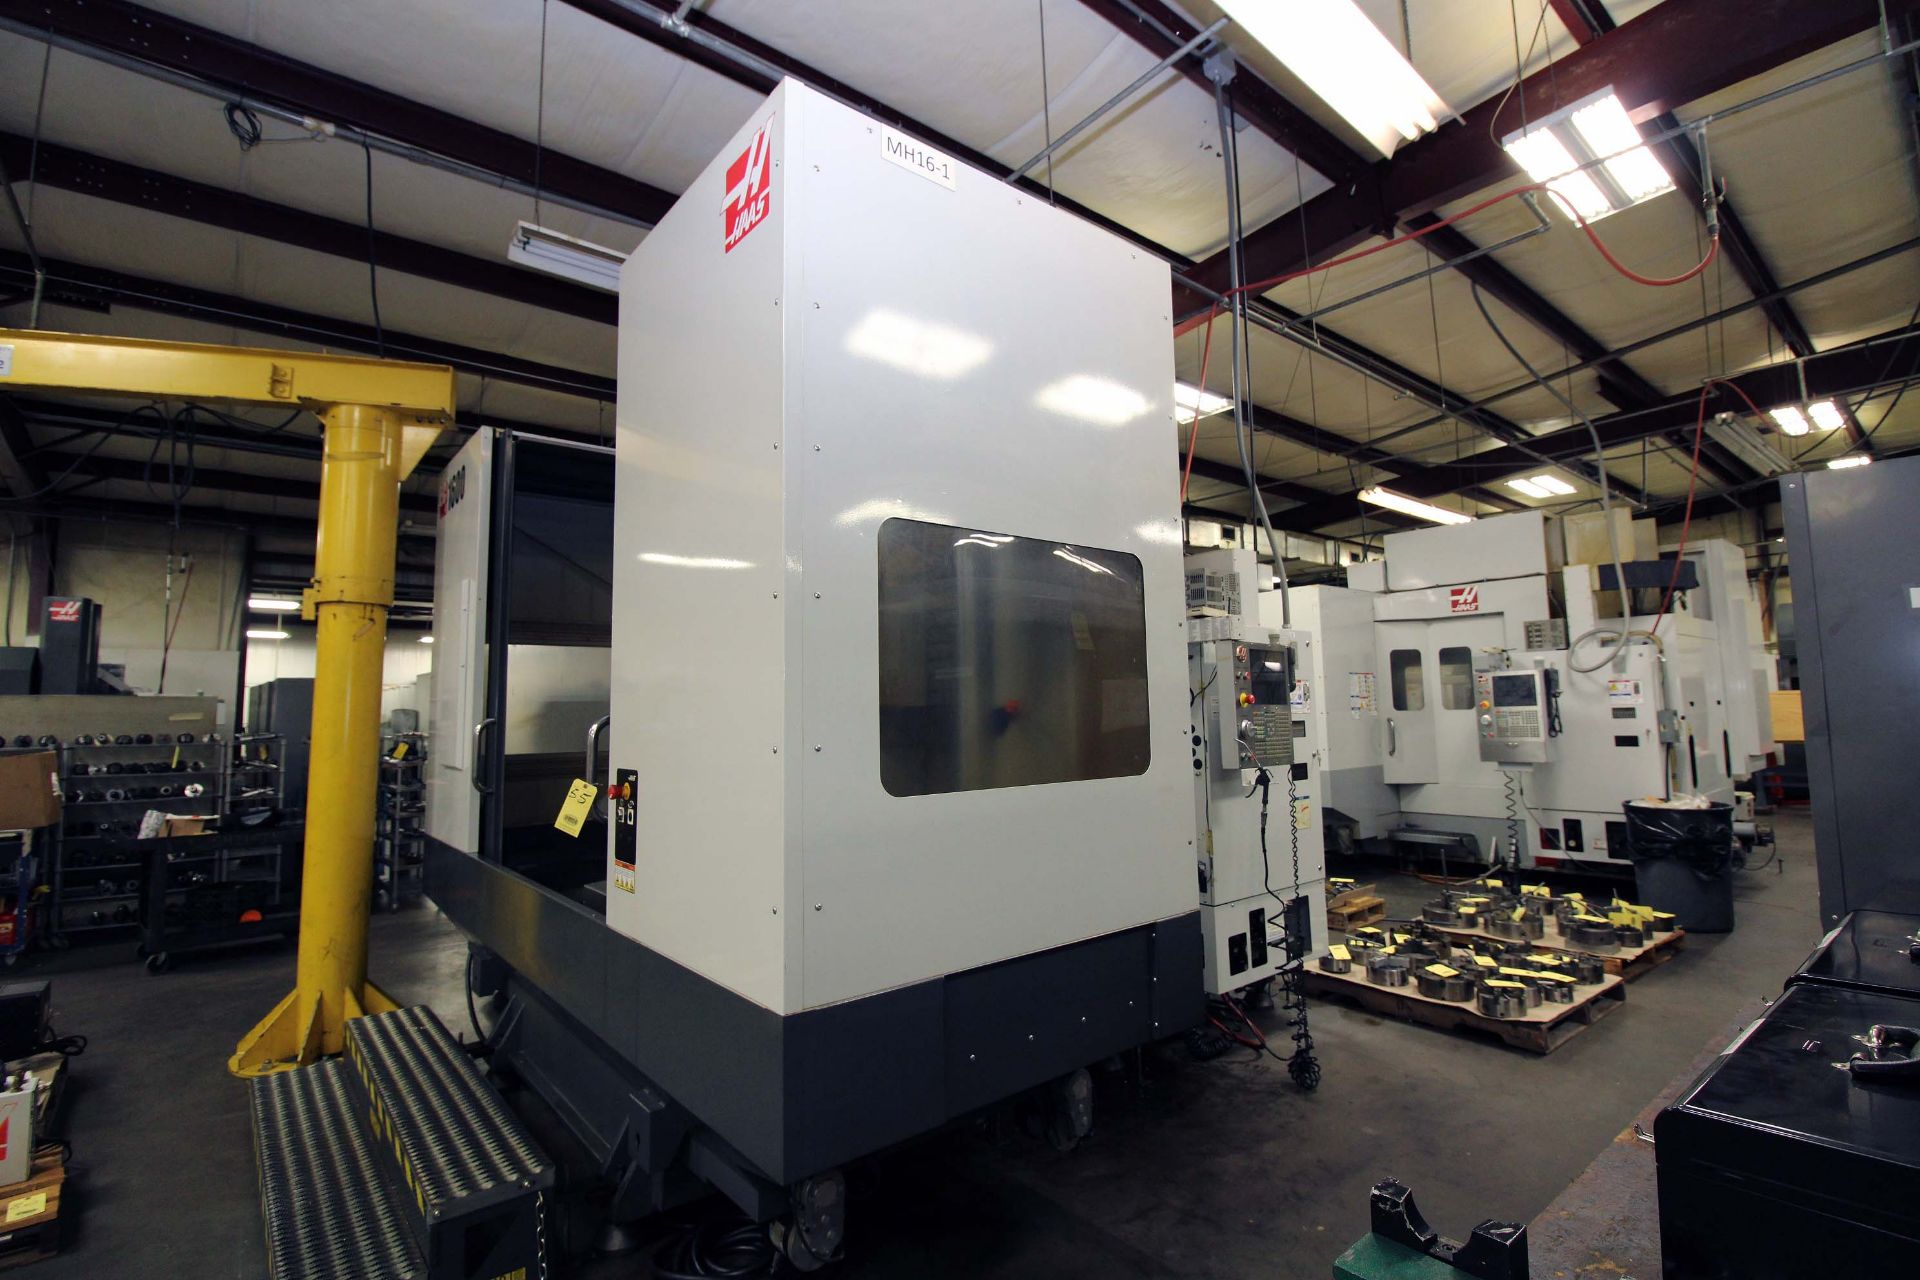 4-AXIS HORIZONTAL MACHINING CENTER, HAAS MDL. EC1600, new 10/2012, 64” x 36” table, 30” built-in - Image 8 of 14